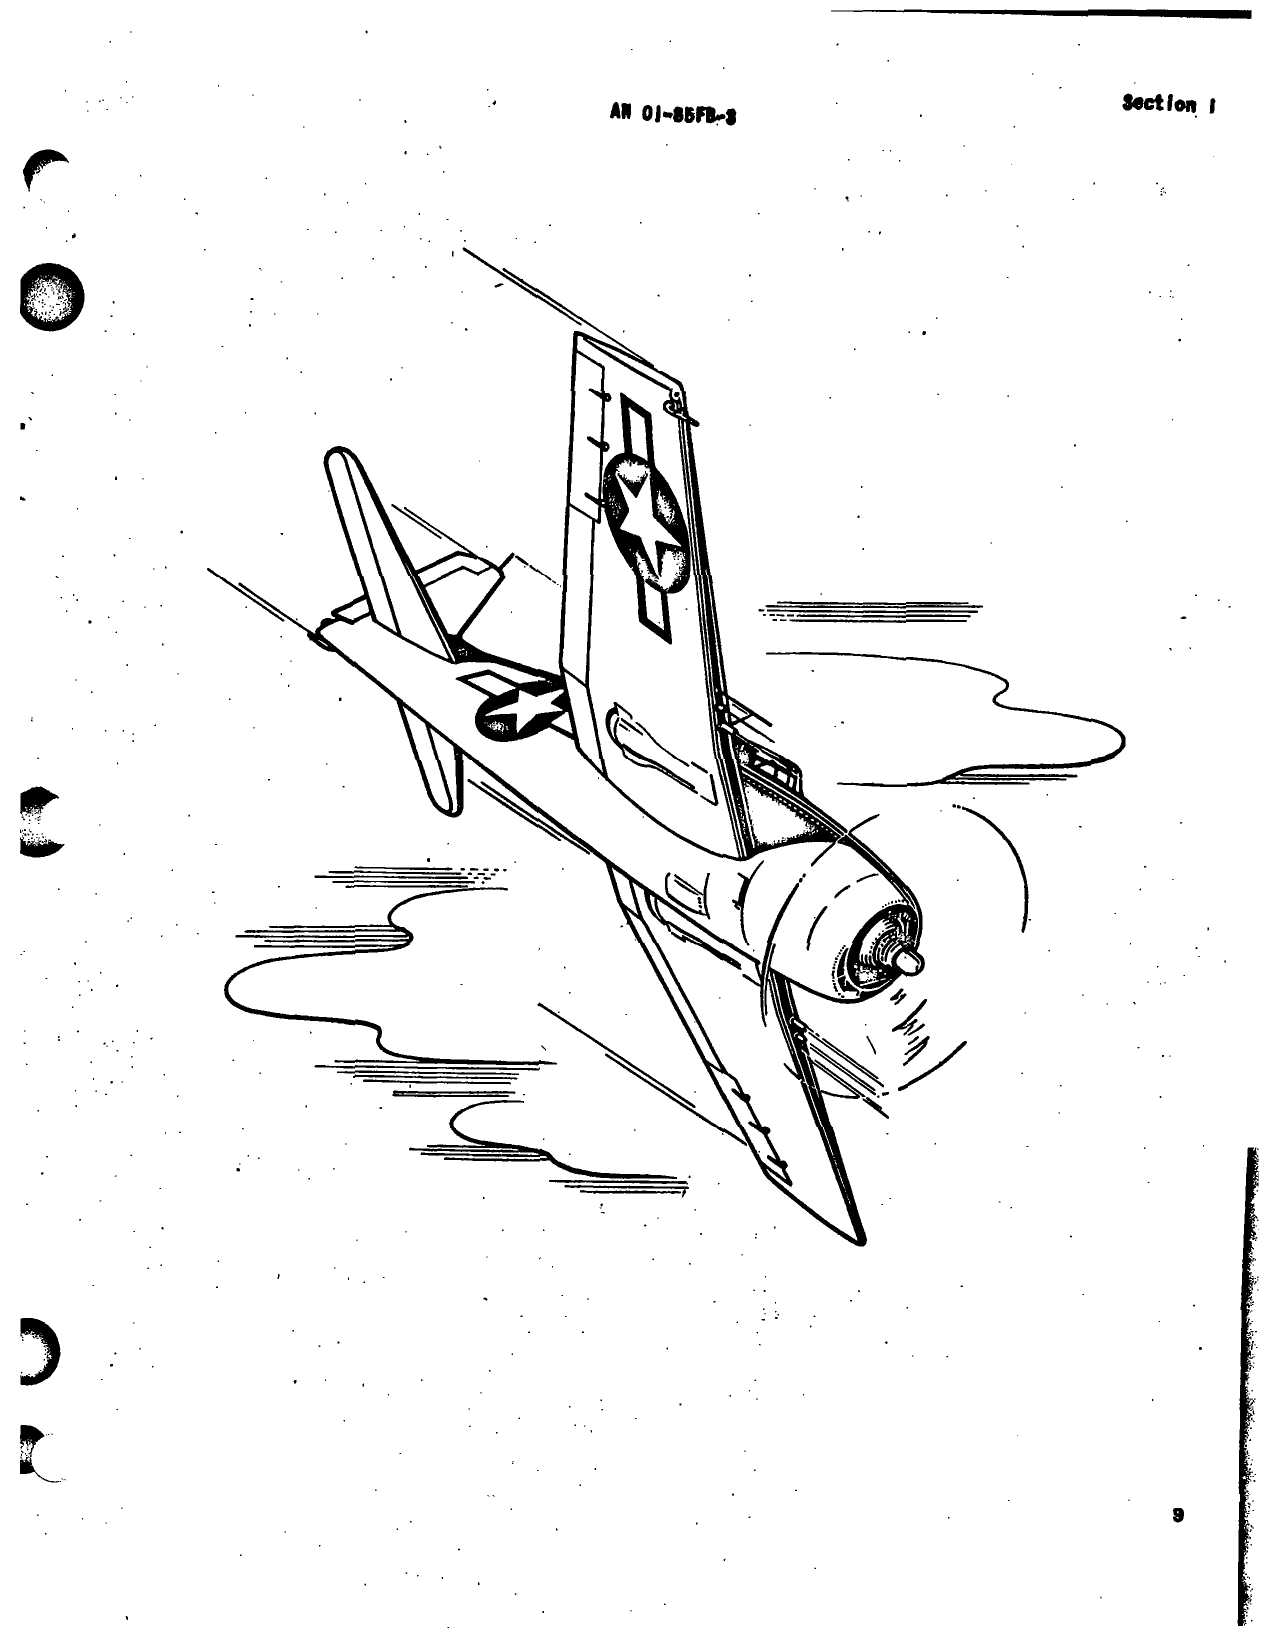 Sample page  16 from AirCorps Library document: Structural Repair - F6F-3, F6F-5